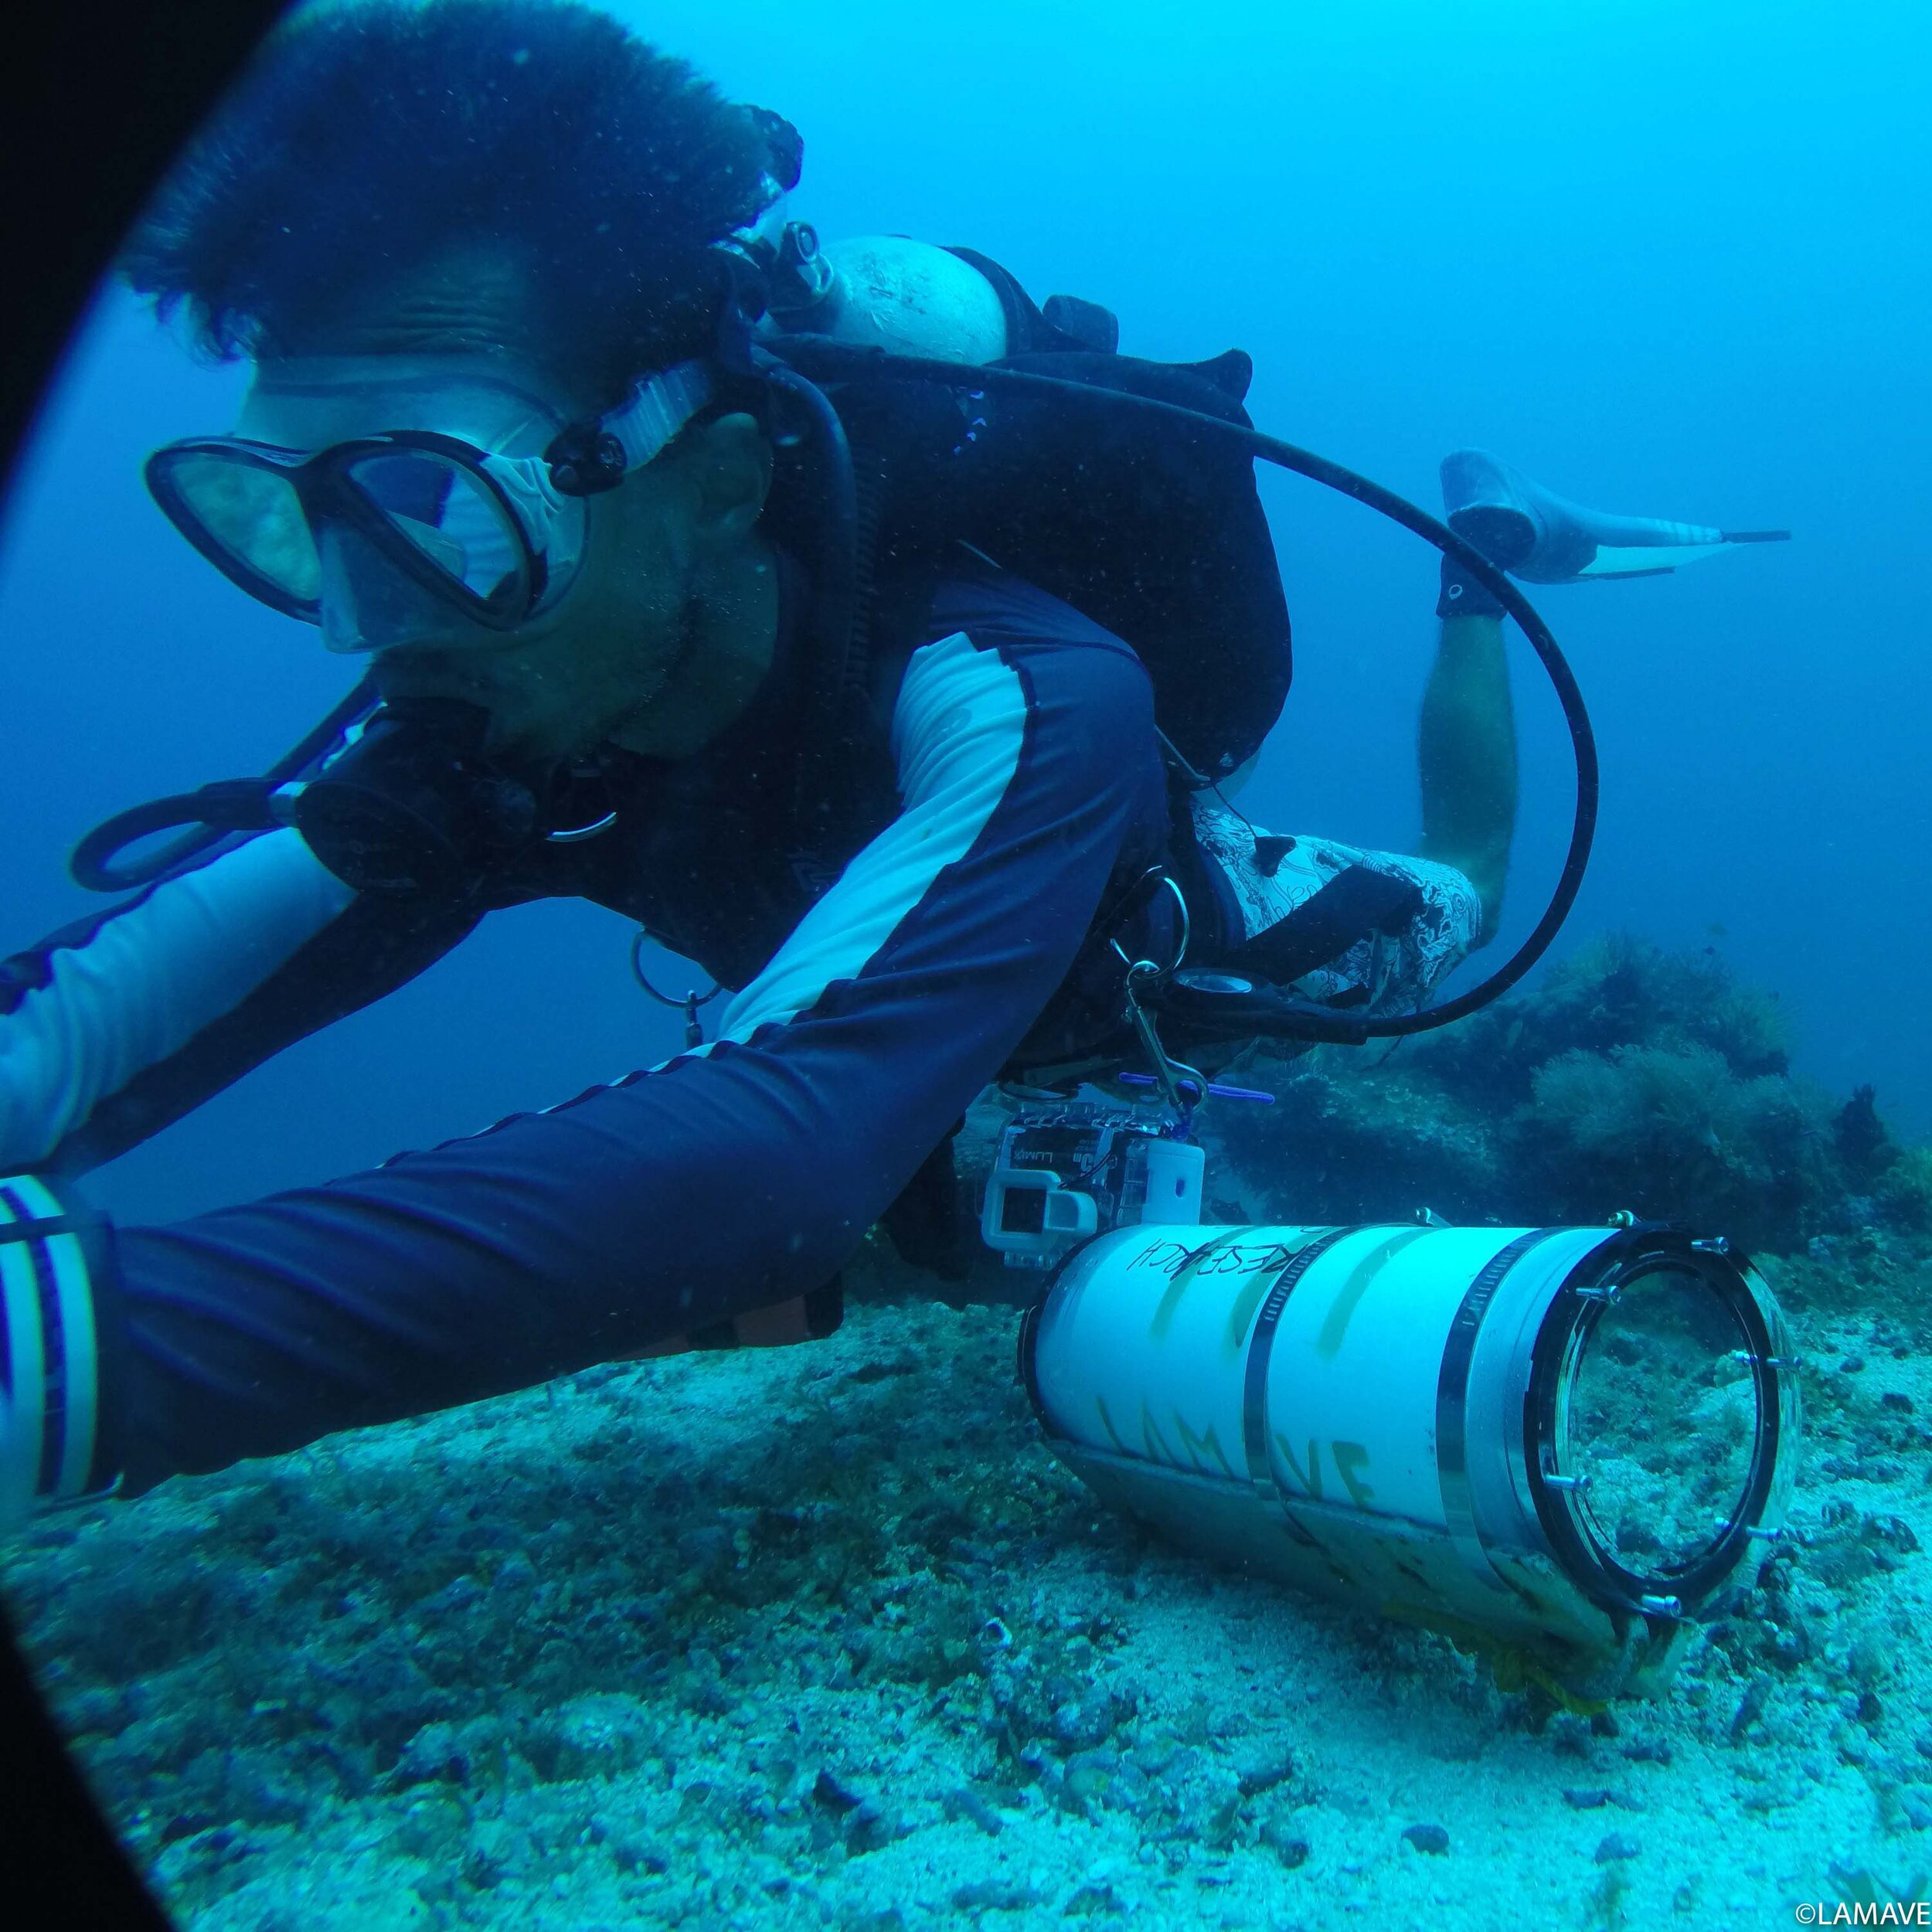 lamave researcher deploys a remote underwater video to study manta rays